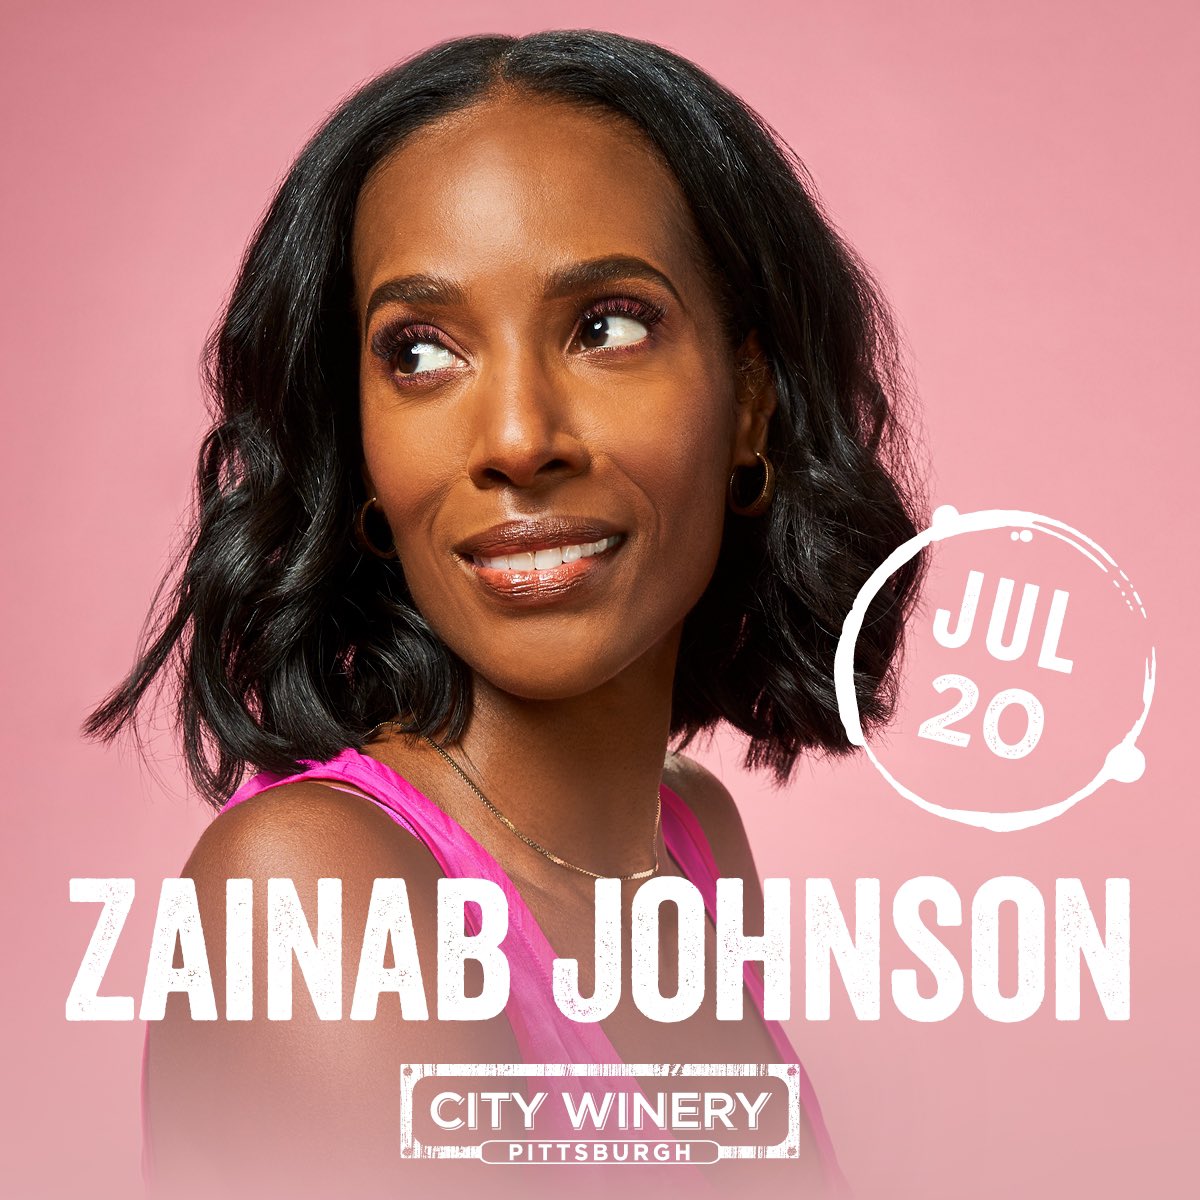 All Things Comedy on X: When you have strict parents. @zainabjohnson Watch  Zainab's new special Hijabs Off streaming now on @PrimeVideo Produced by  All Things Comedy! #ATCpresents #zainabjohnson #hijabsoff   / X